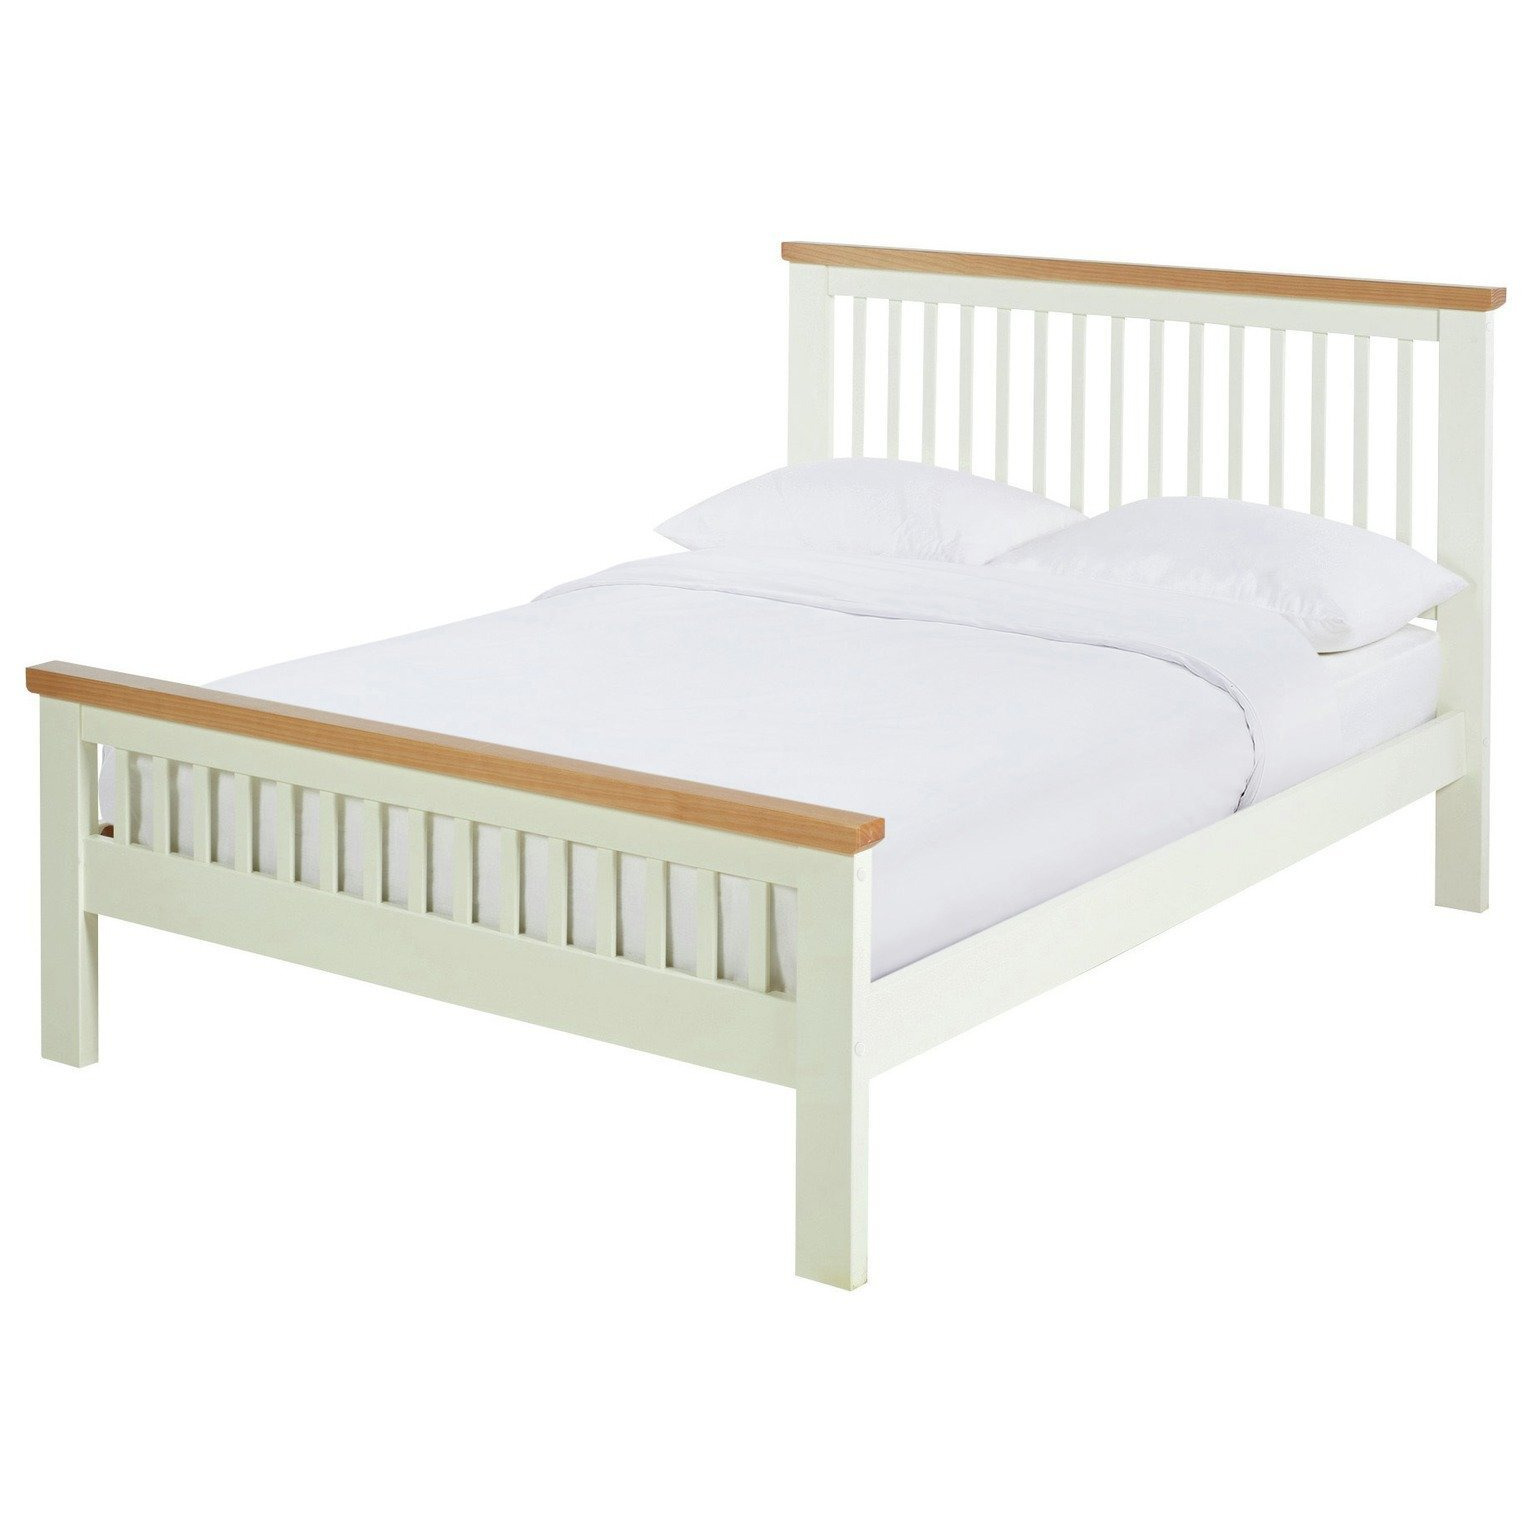 Argos Home Aubrey Superking Wooden Bed Frame - Two Tone - image 1